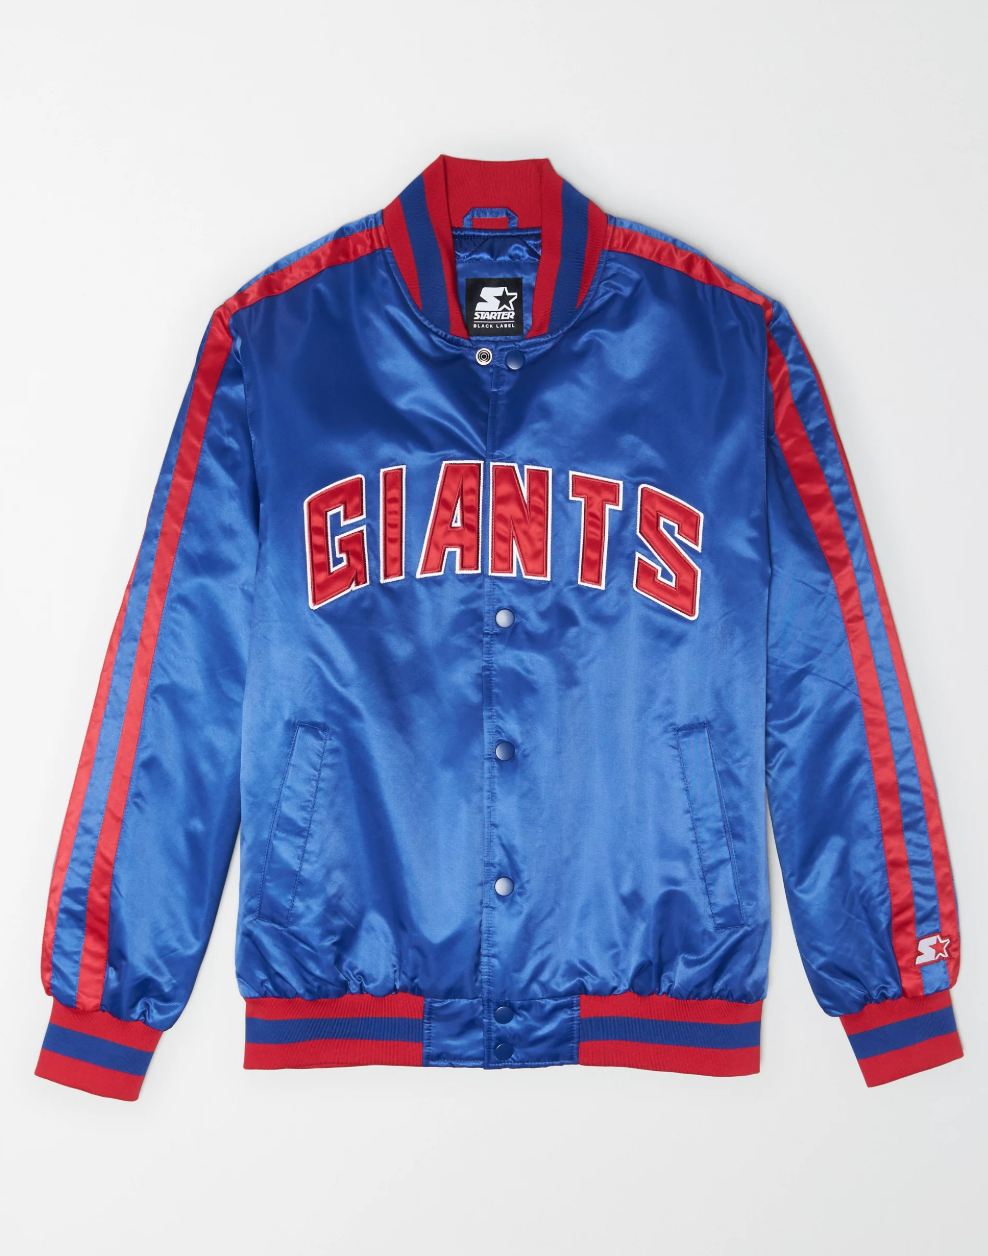 American Eagle Launches '90s-Inspired NFL and NBA Tailgating Collection ...